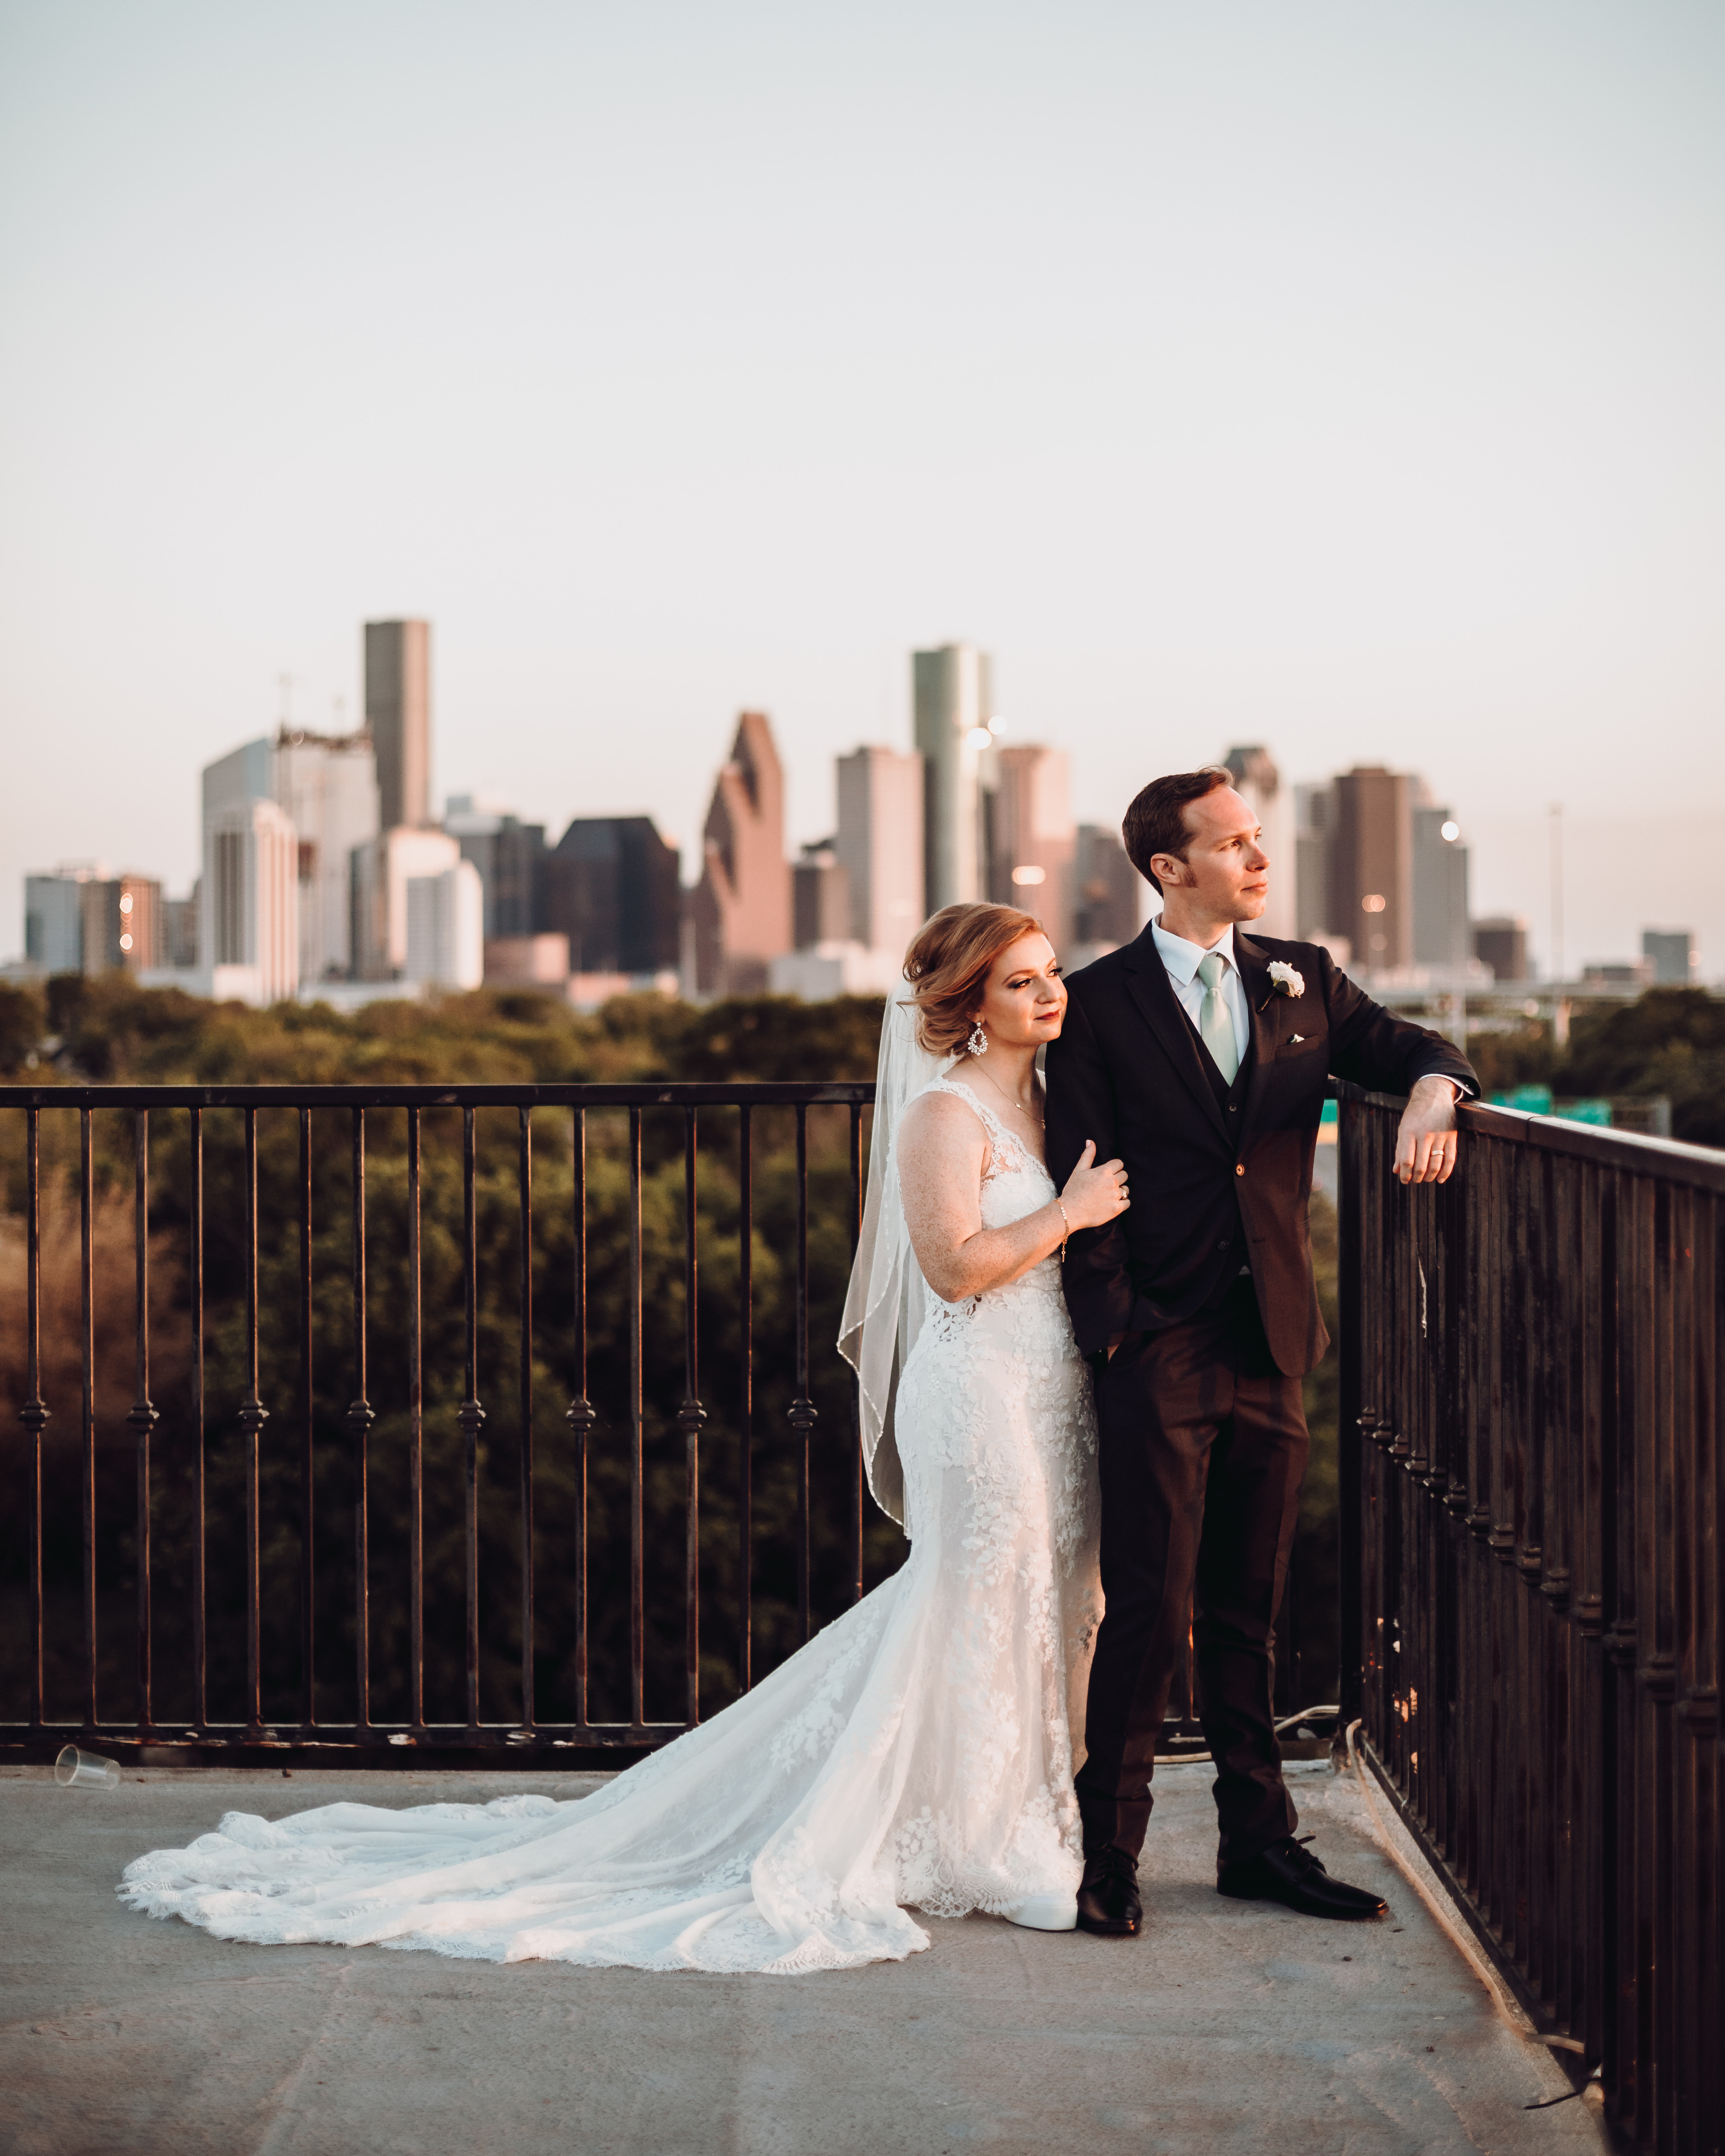 A bride and groom stand outside on a balcony in front of the Houston skyline at their wedding venue.